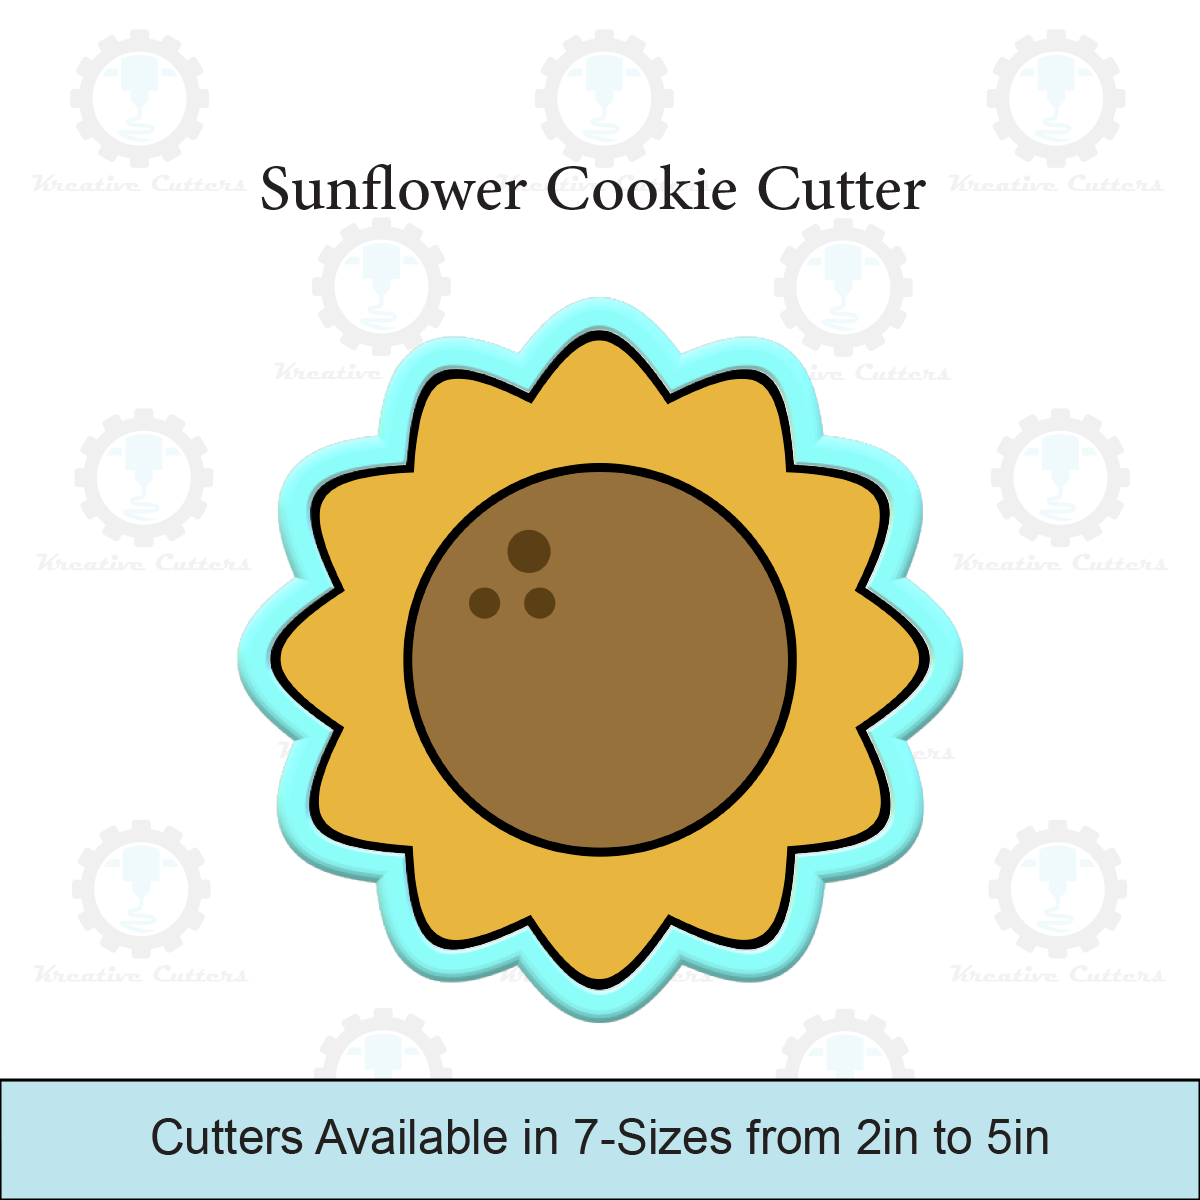 Sunflower Cookie Cutters